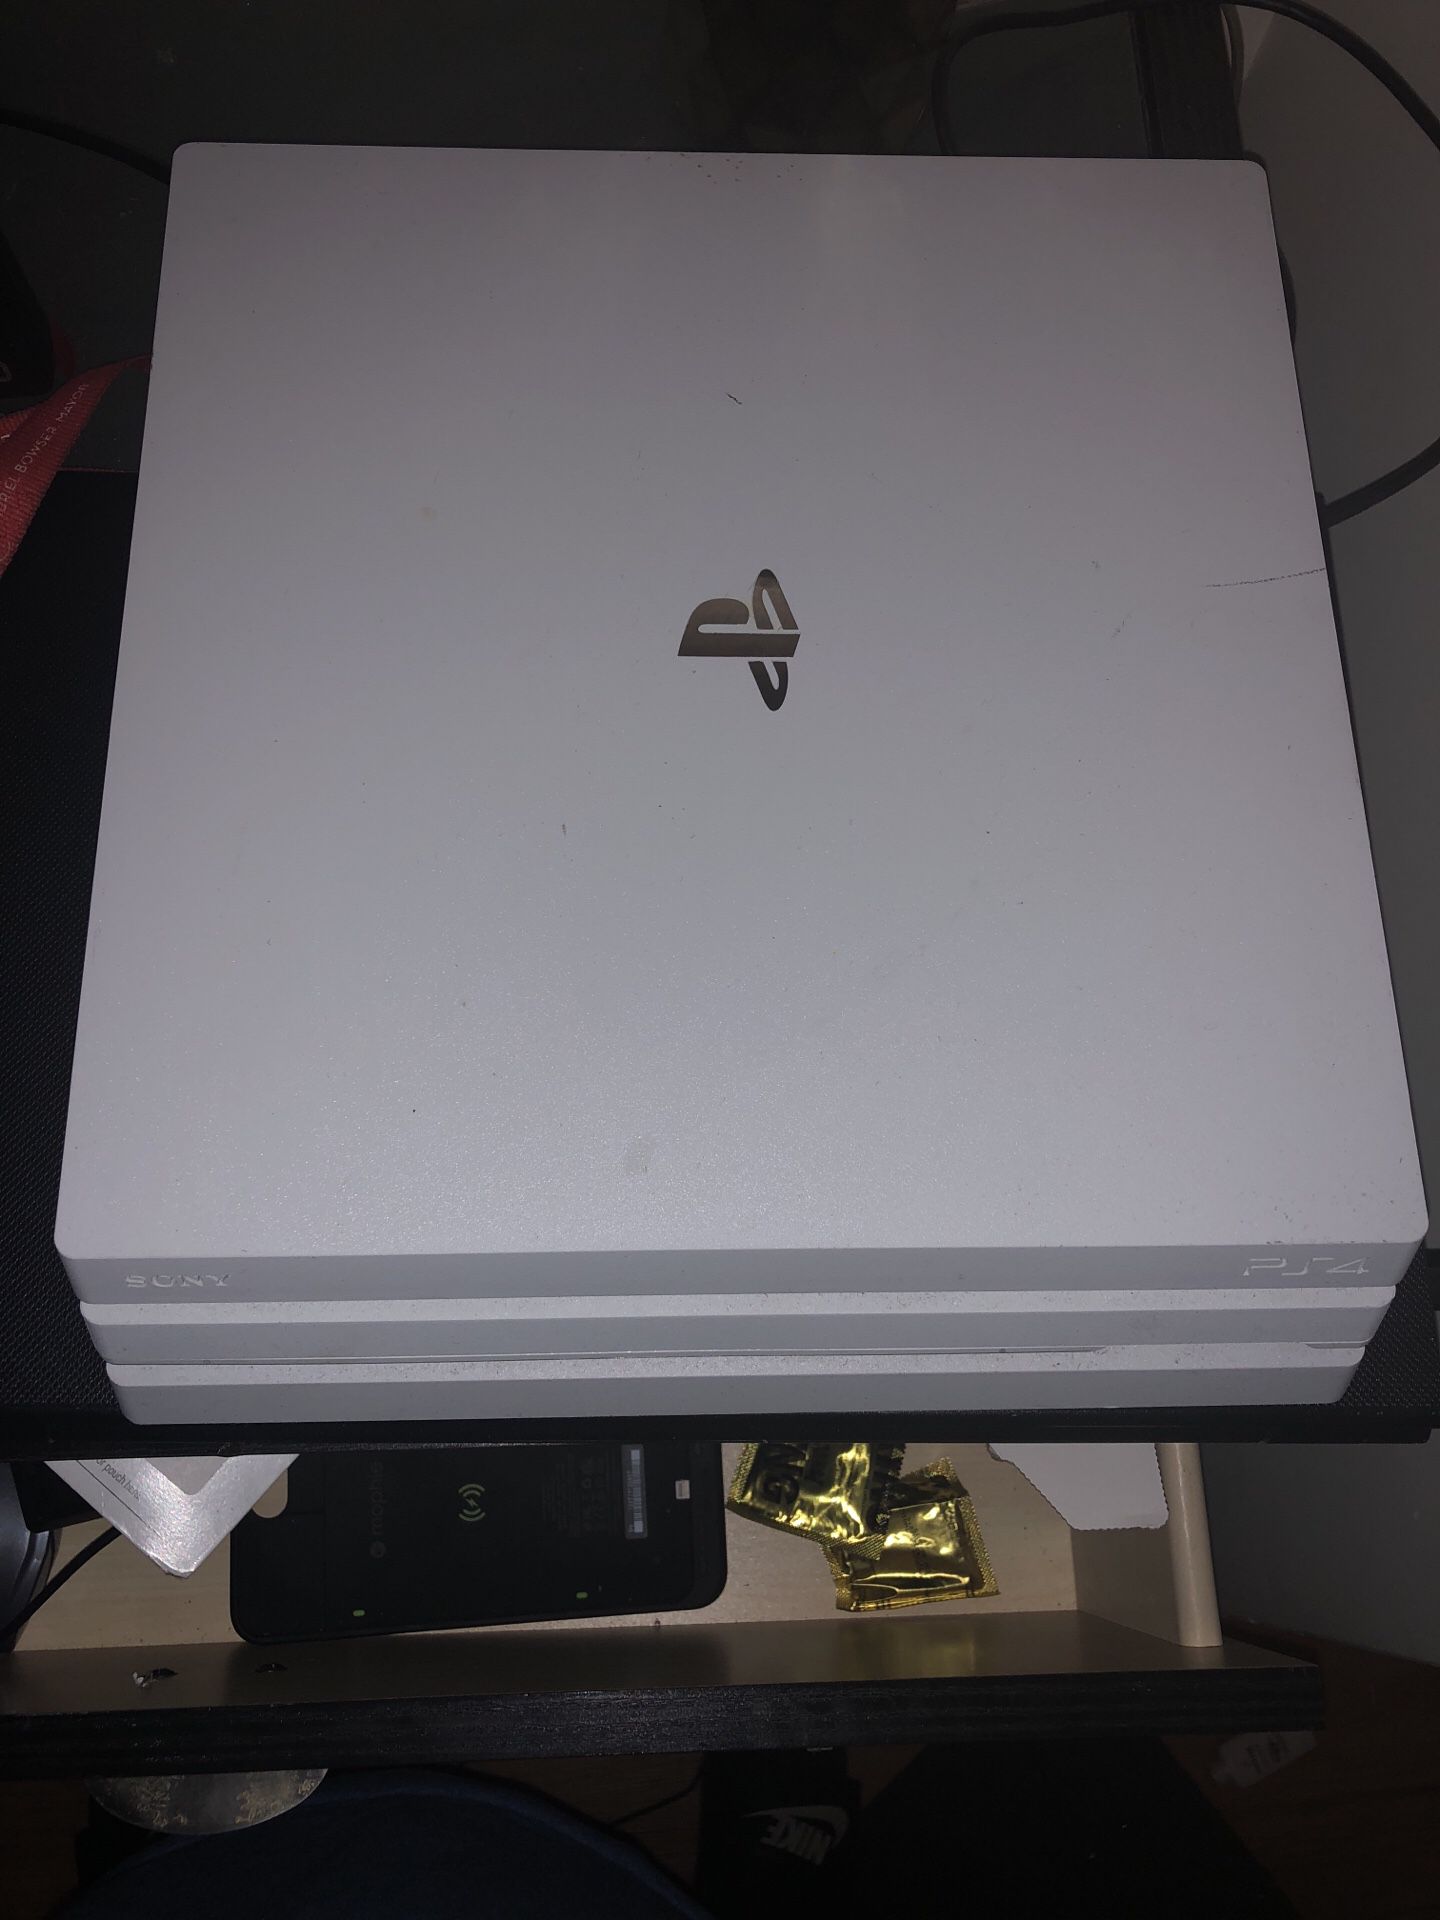 PlayStation 4 pro , great condition , had for 4 months